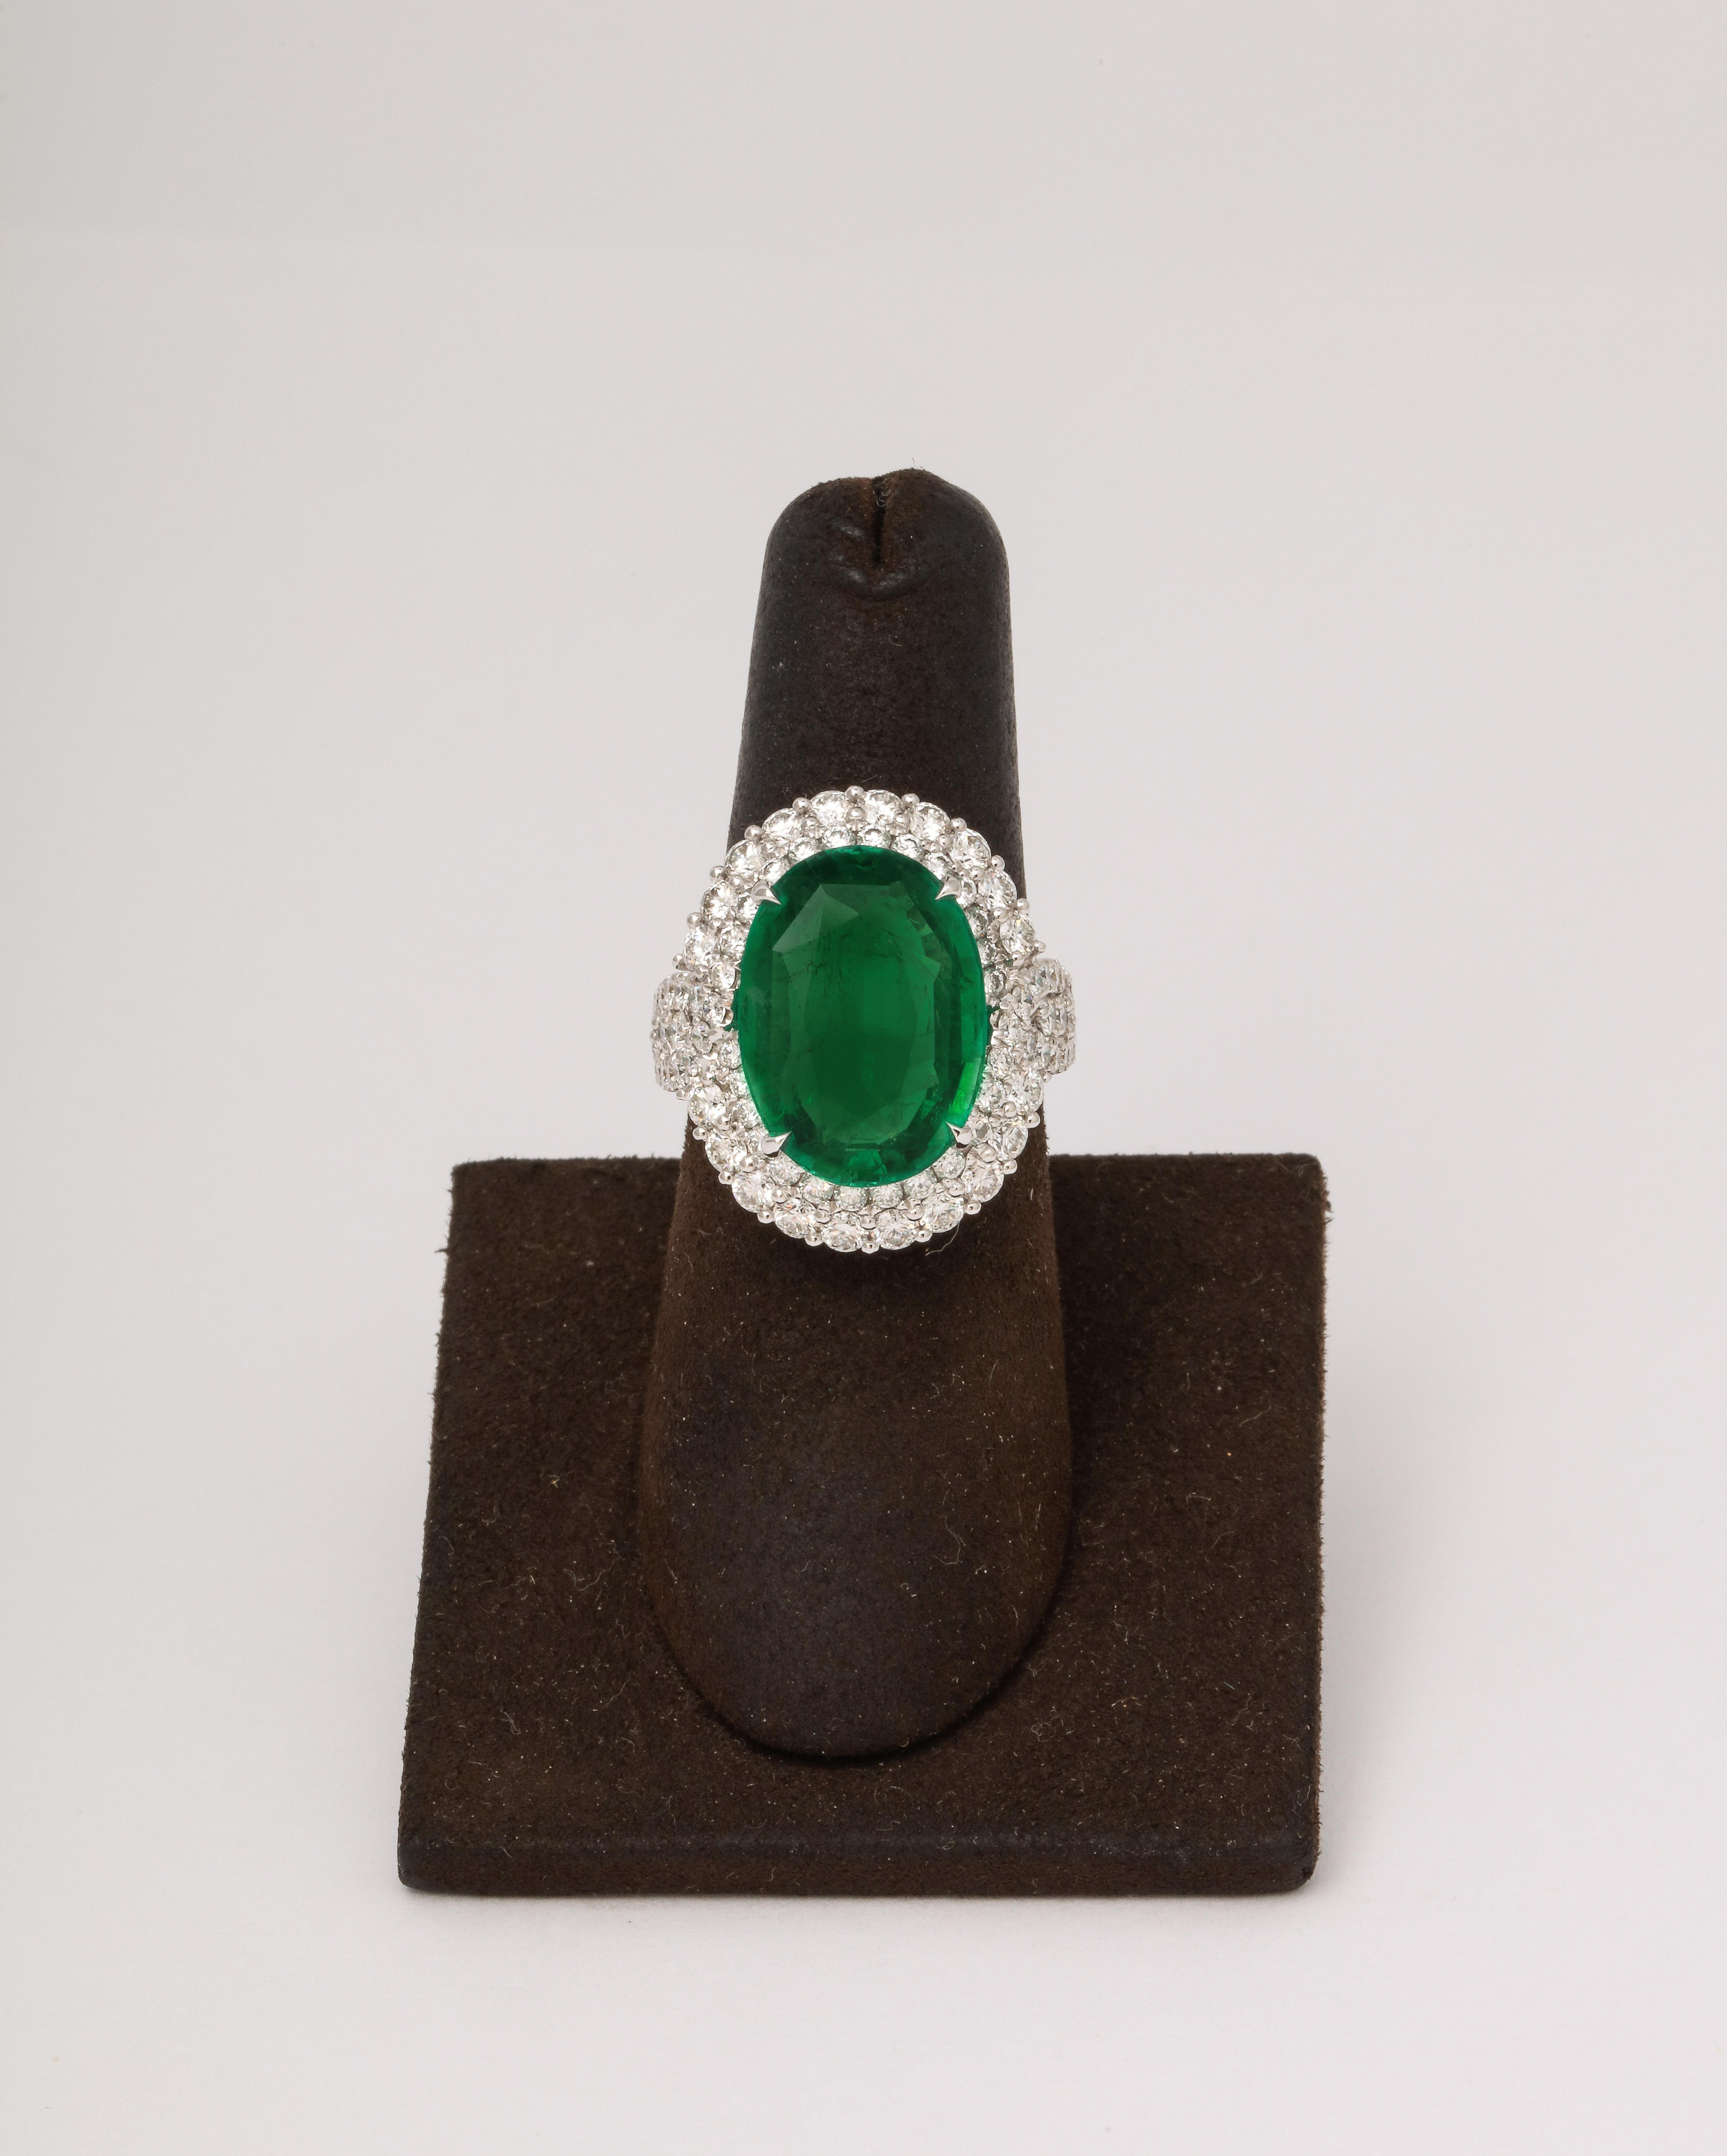 
A FABULOUS ring! 

9.53 carat Vivid Green Oval shaped emerald. 

2.13 carats of round brilliant cut diamonds. 

Set in 18k white gold 

Currently a size 6.5, this ring can be sized to any finger size. 

Exceptional color - pictures do not do this